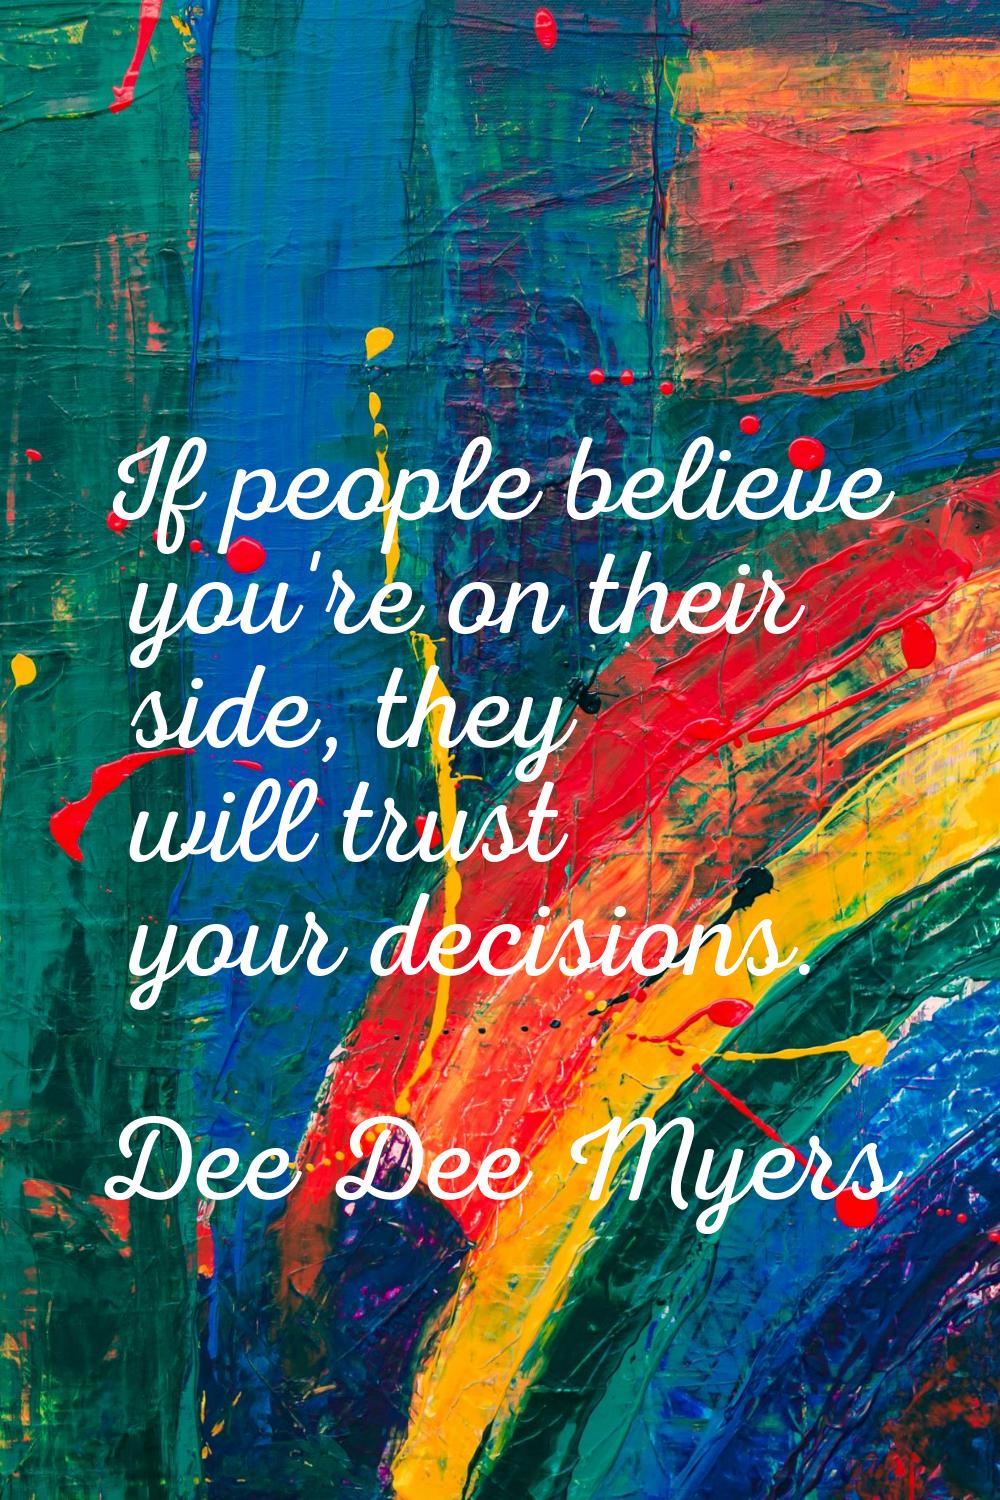 If people believe you're on their side, they will trust your decisions.